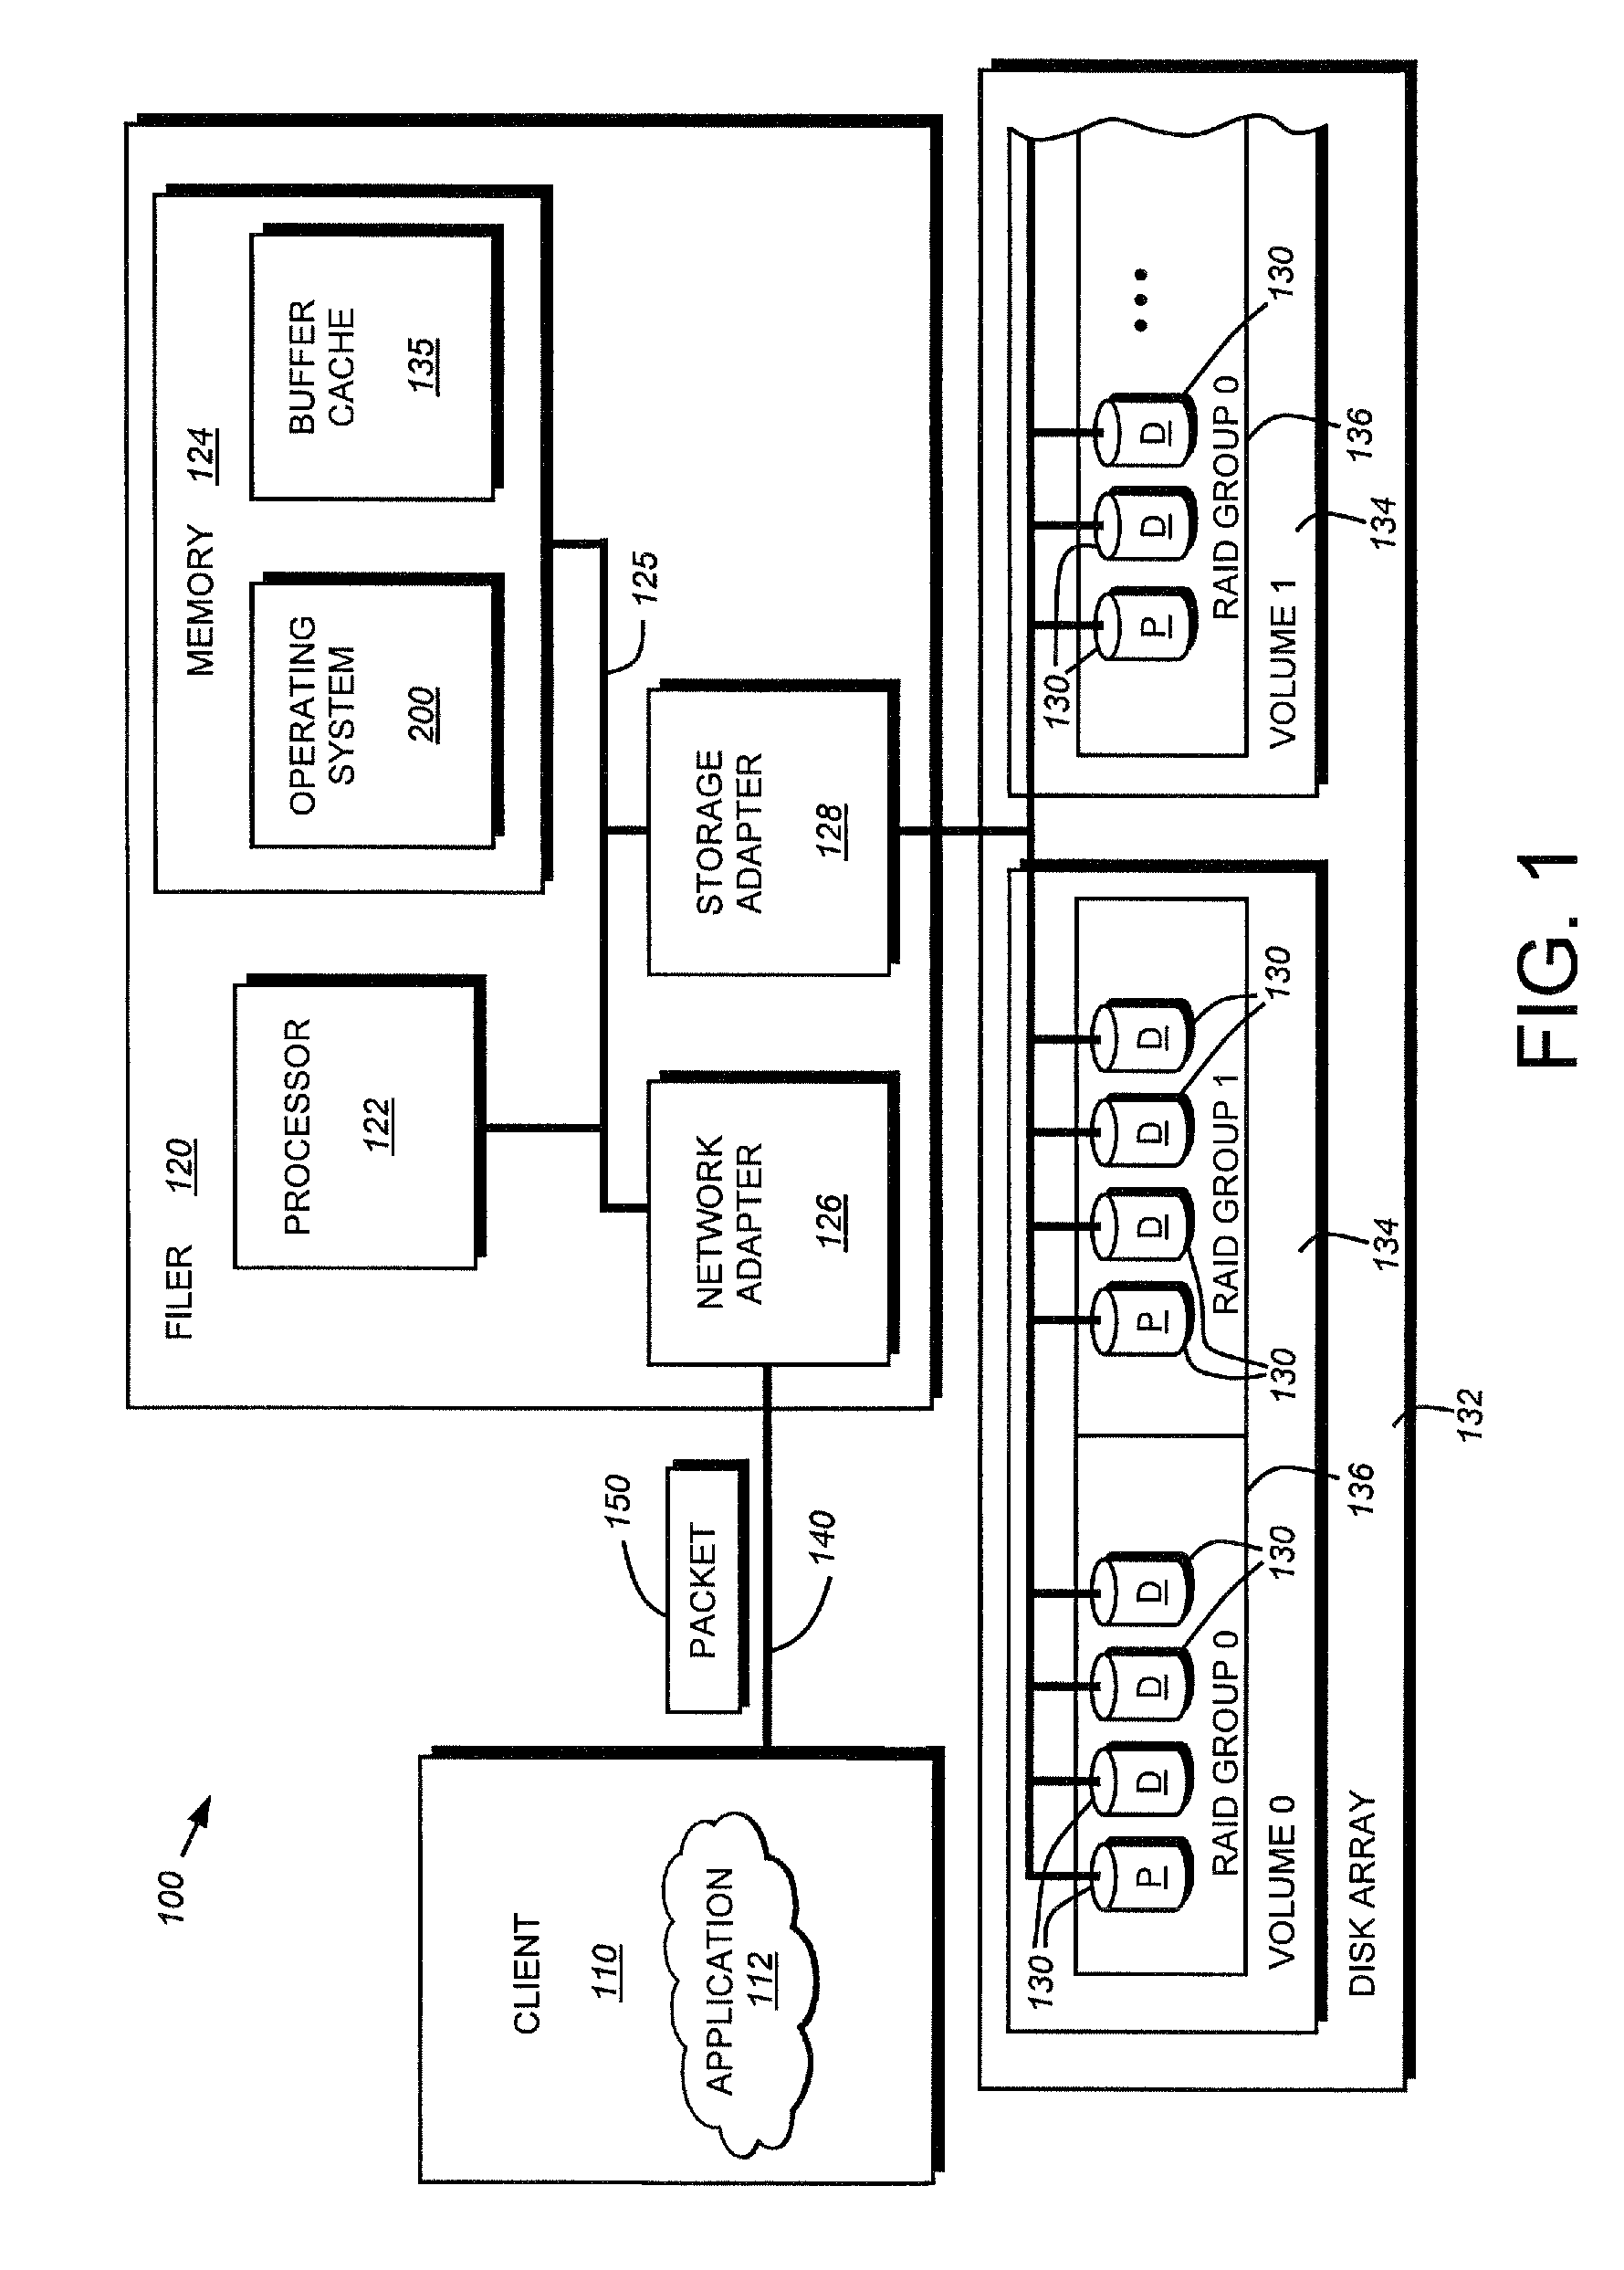 System and method for logging disk failure analysis in disk nonvolatile memory